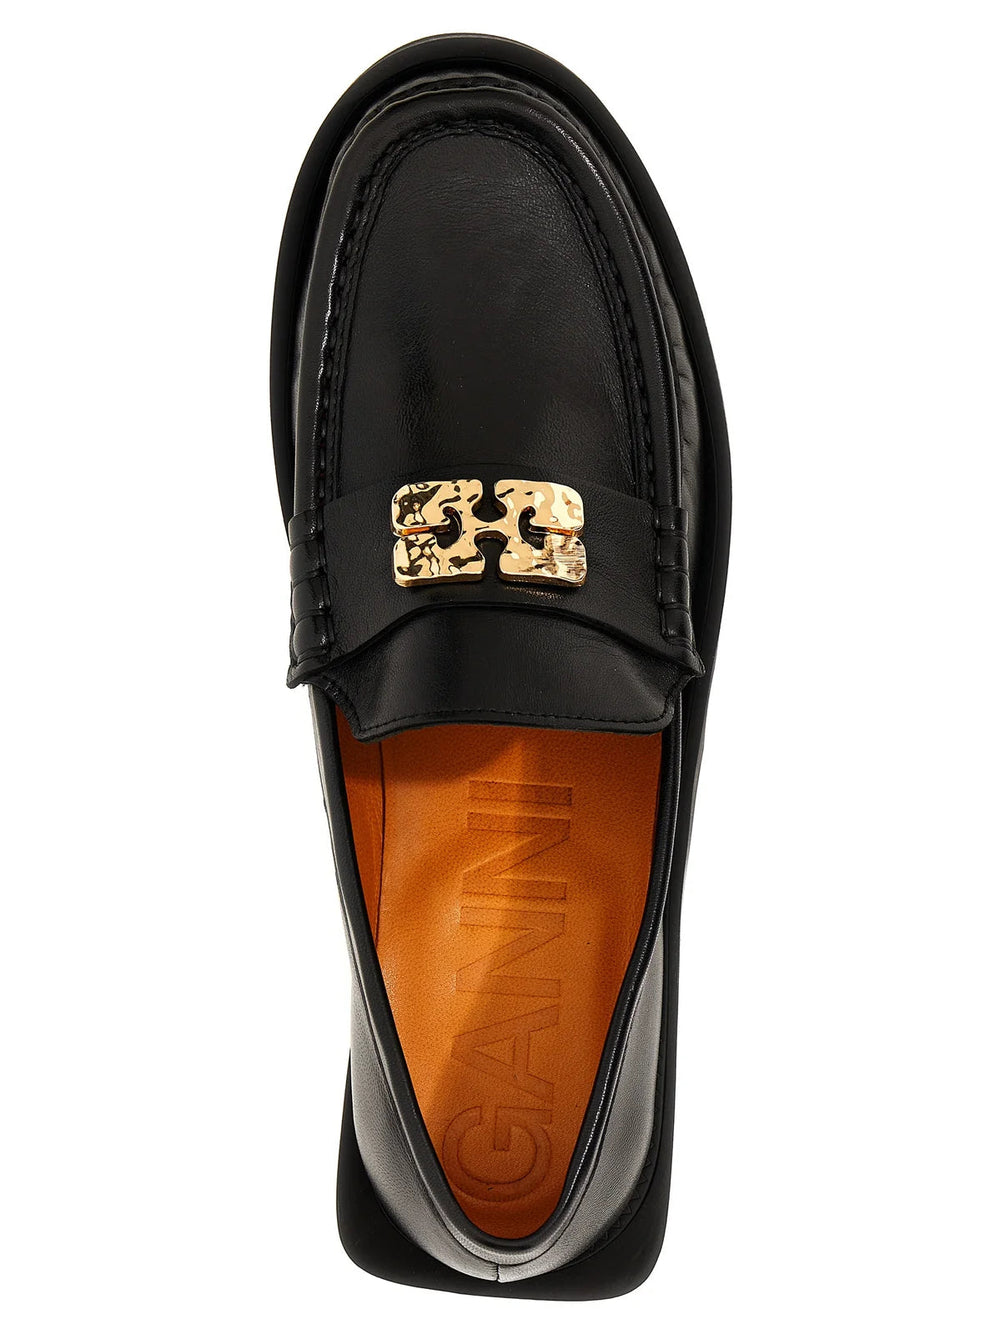 BUTTERFLY LOGO LOAFERS IN BLACK SHOES GANNI 